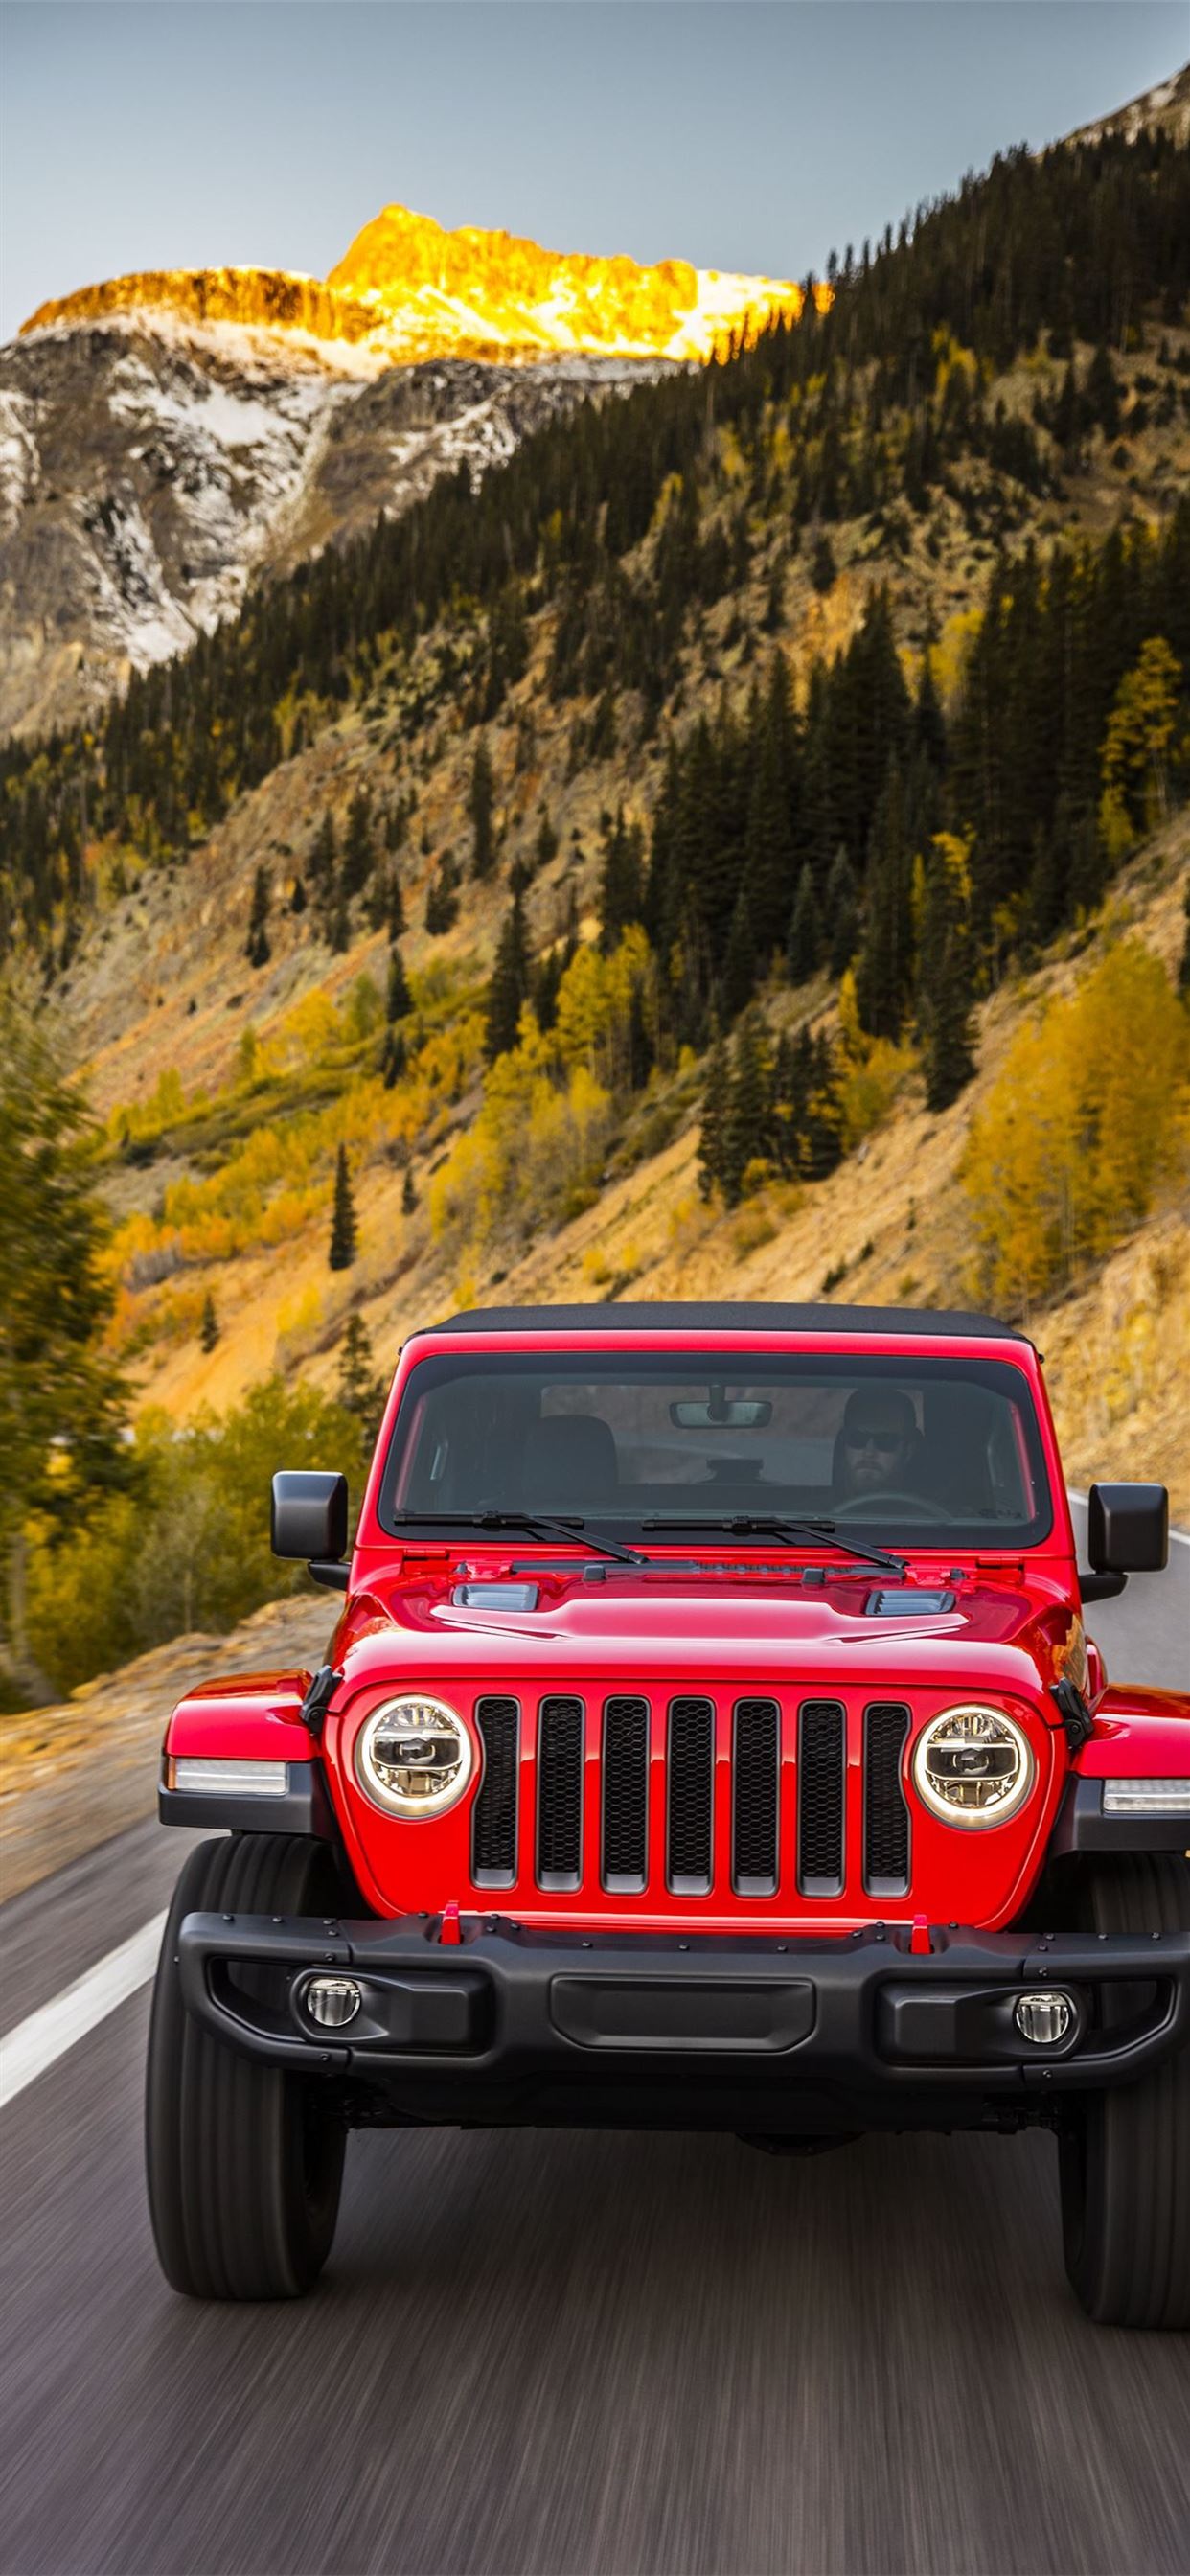 Jeep Wrangler 18 Iphone Wallpapers Free Download